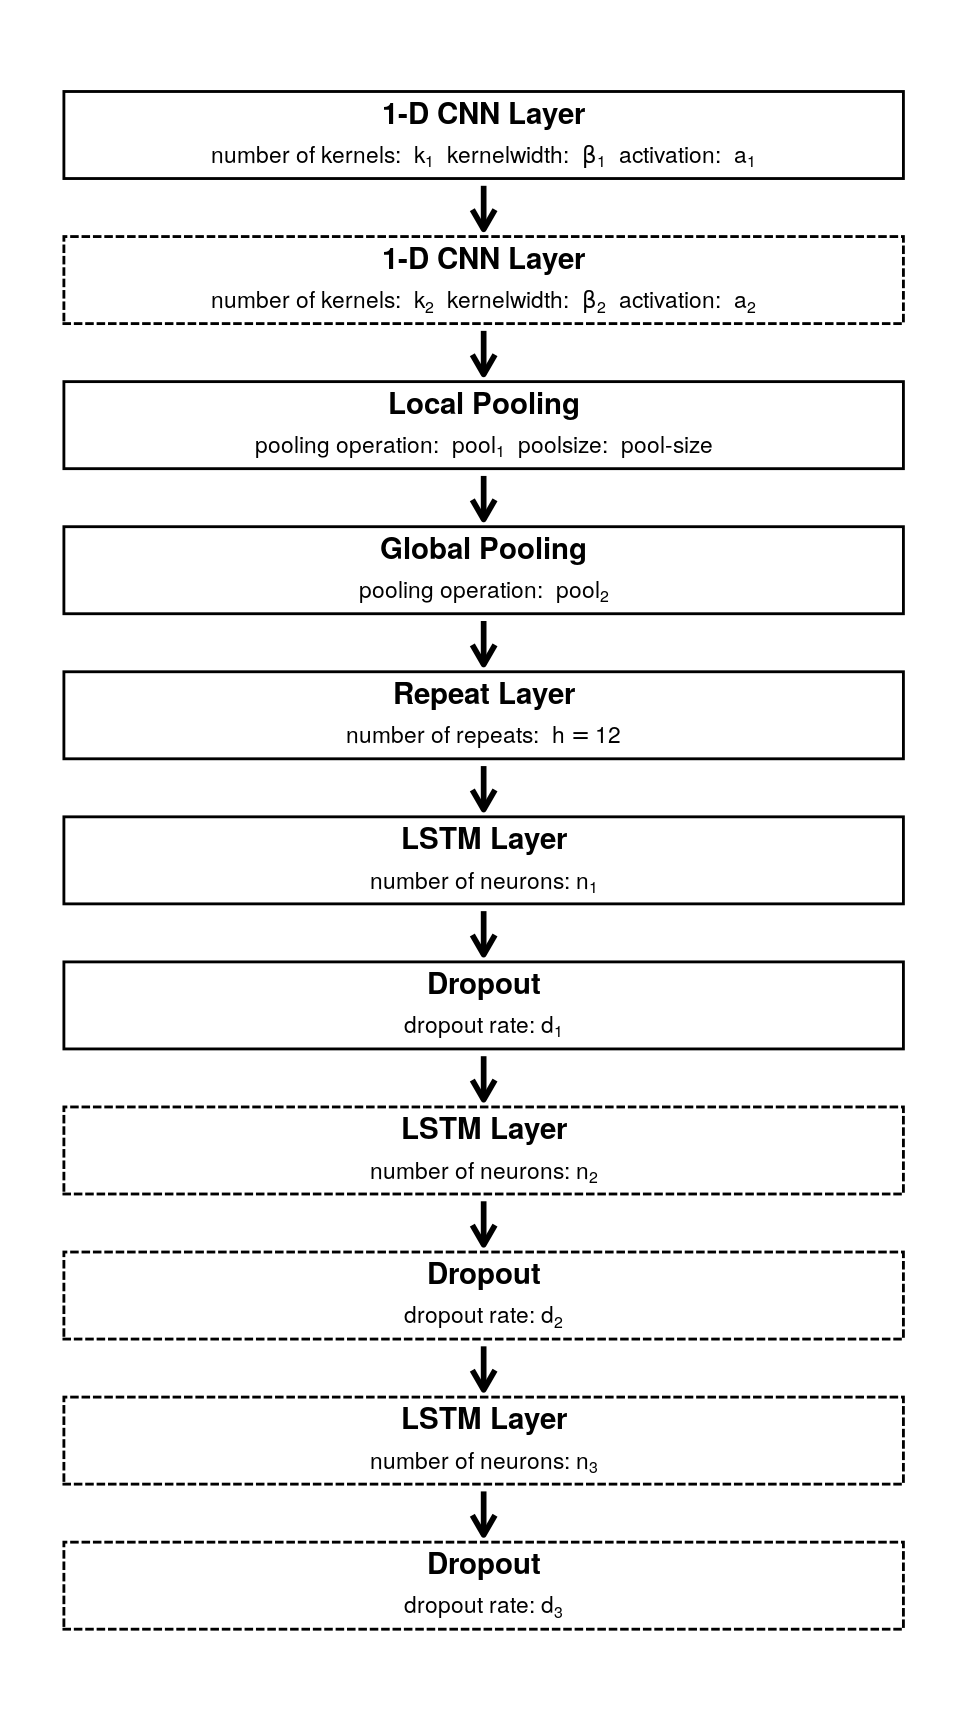 Proposed architecture of a single CNN-LSTM branch. Bold lines indicate mandatory layers, dashed lines indicate potential layers which are determined together with other parameters during a hyperparamter optimization process.